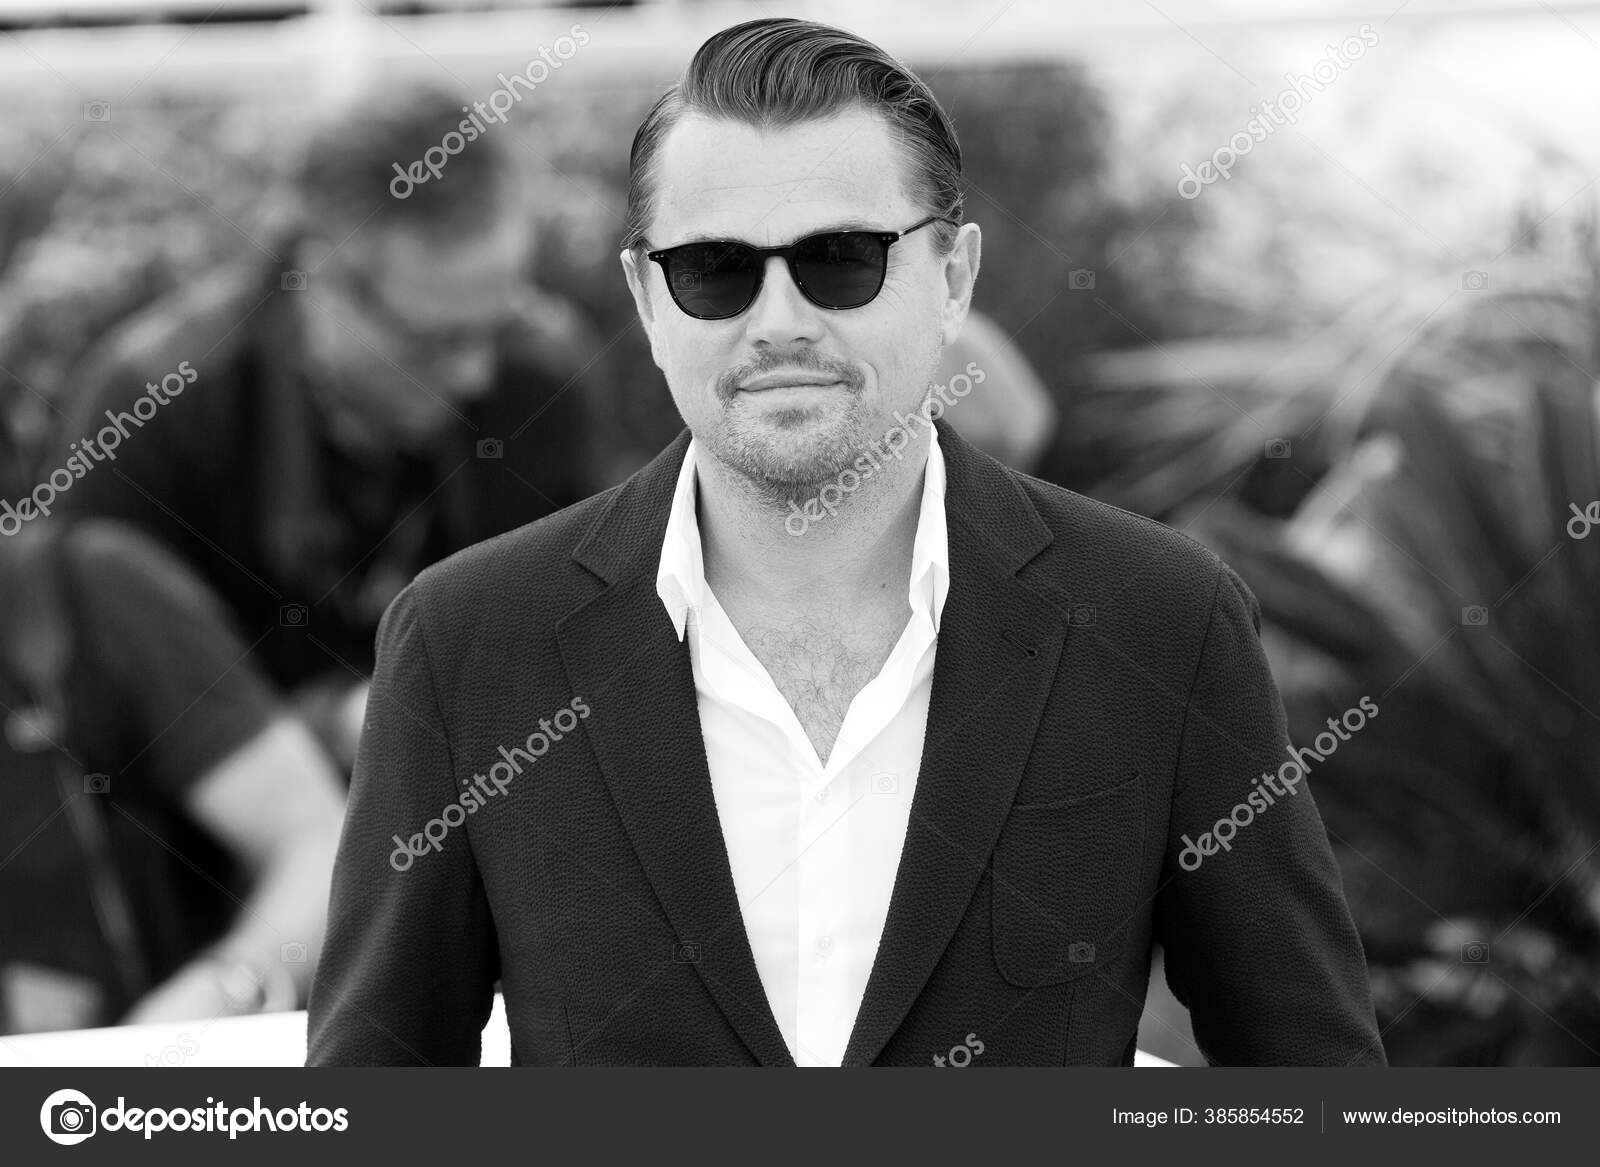 Buy Leonardo Dicaprio Lifts Sunglasses Catch Me If You Can 4x6 Photo Online  in India - Etsy